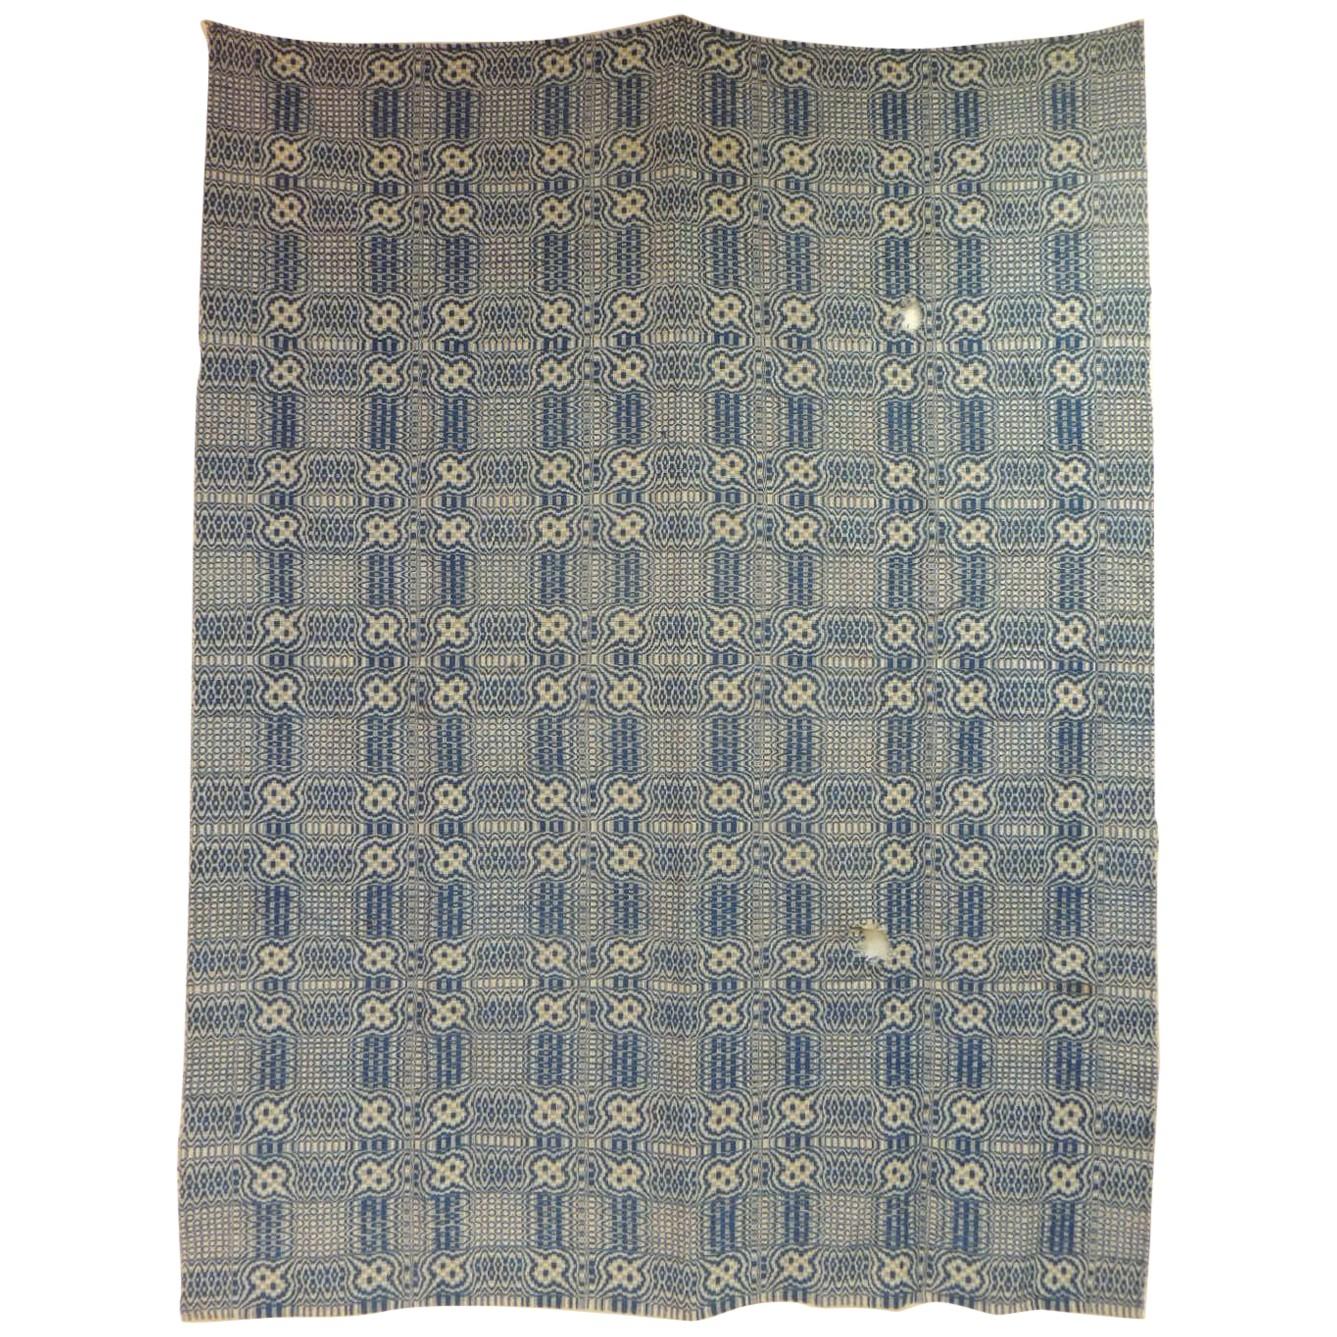 Vintage Americana Style Blue and White Woven Coverlet